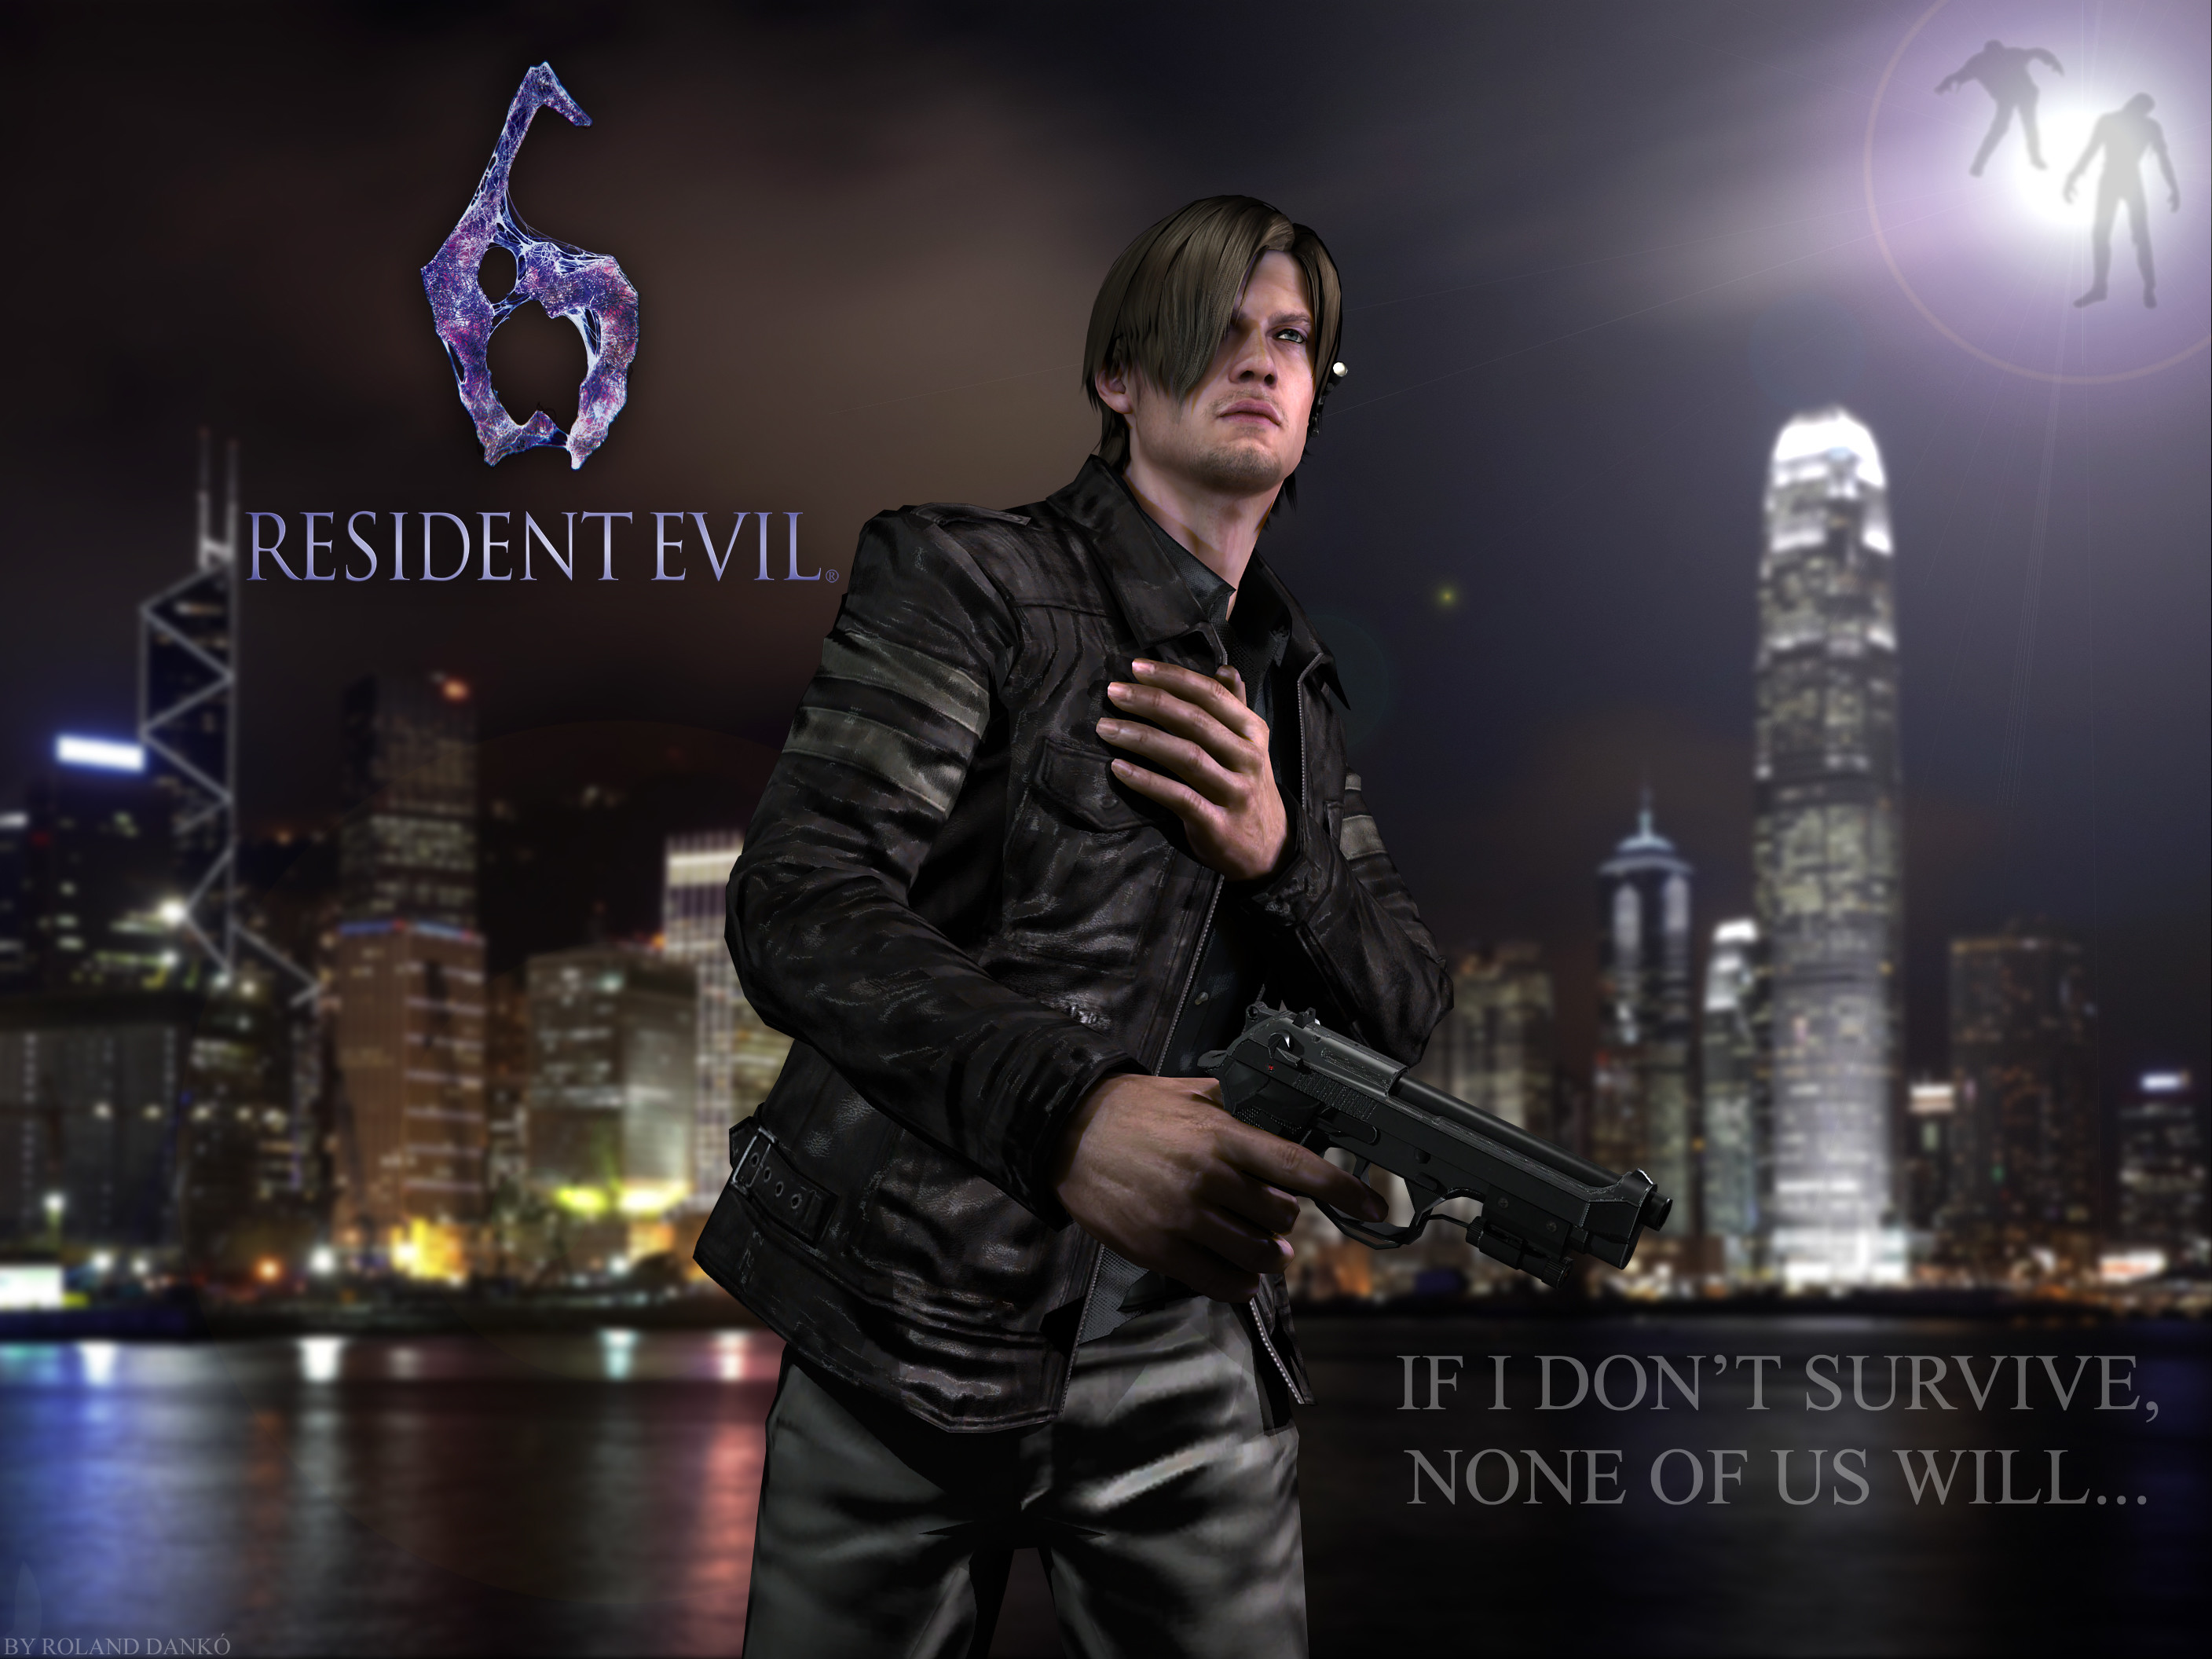 2816x2112 Leon S. Kennedy - Resident Evil 6 by